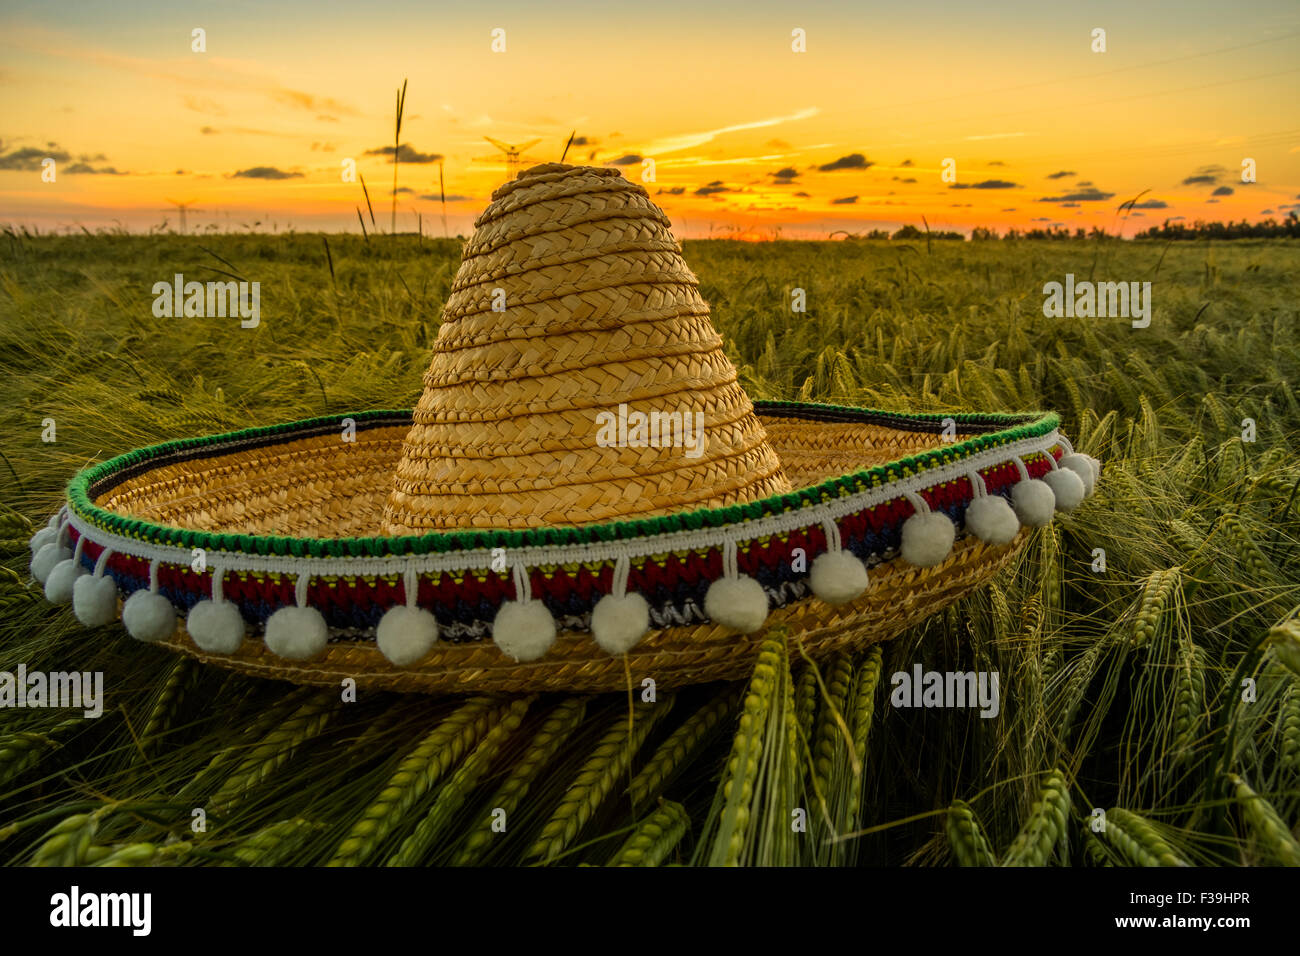 Sombrero hat on a barley field at sunset Stock Photo